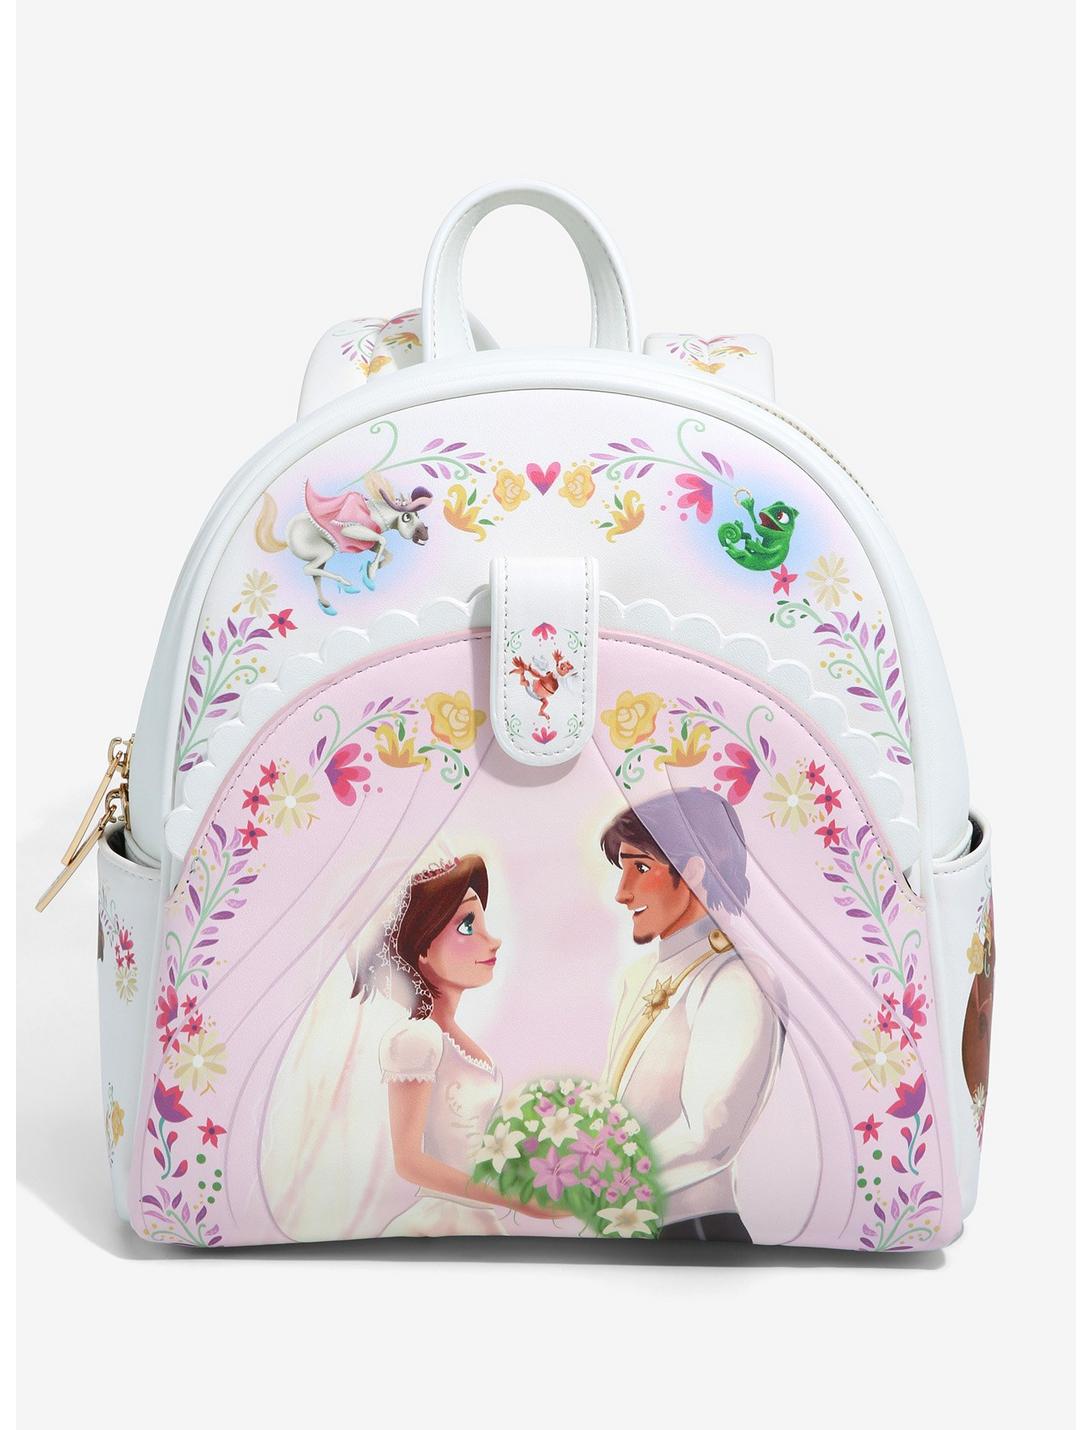 Danielle Nicole Disney Tangled Ever After Royal Wedding Mini Backpack - BoxLunch Exclusive, , hi-res